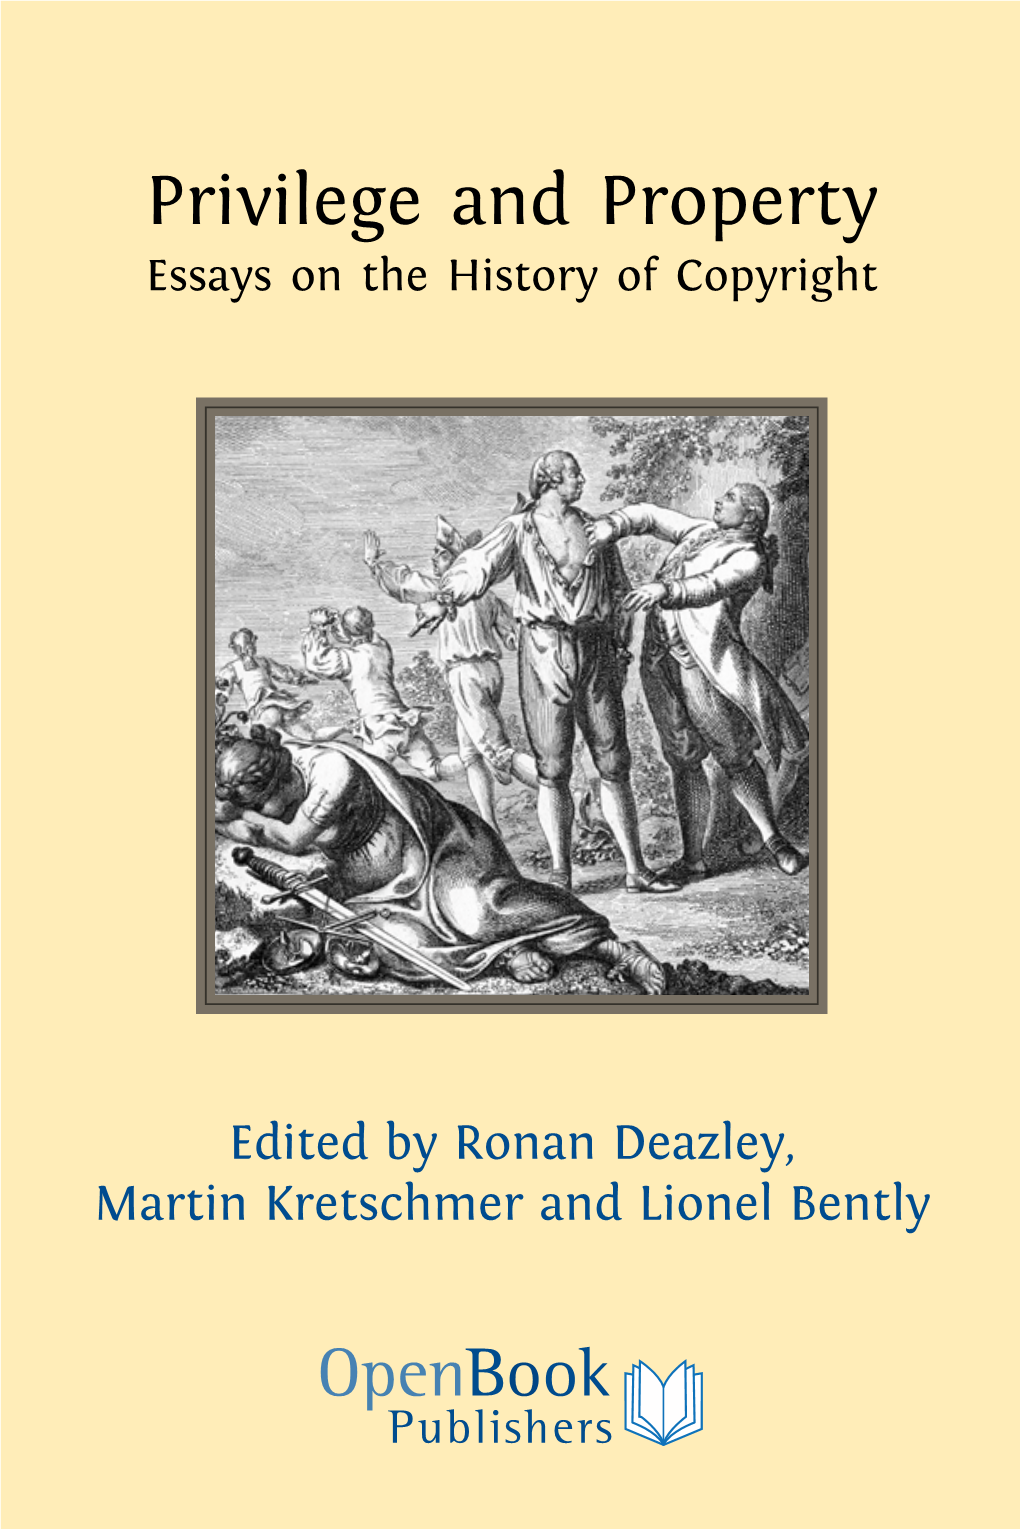 Privilege and Property Essays on the History of Copyright